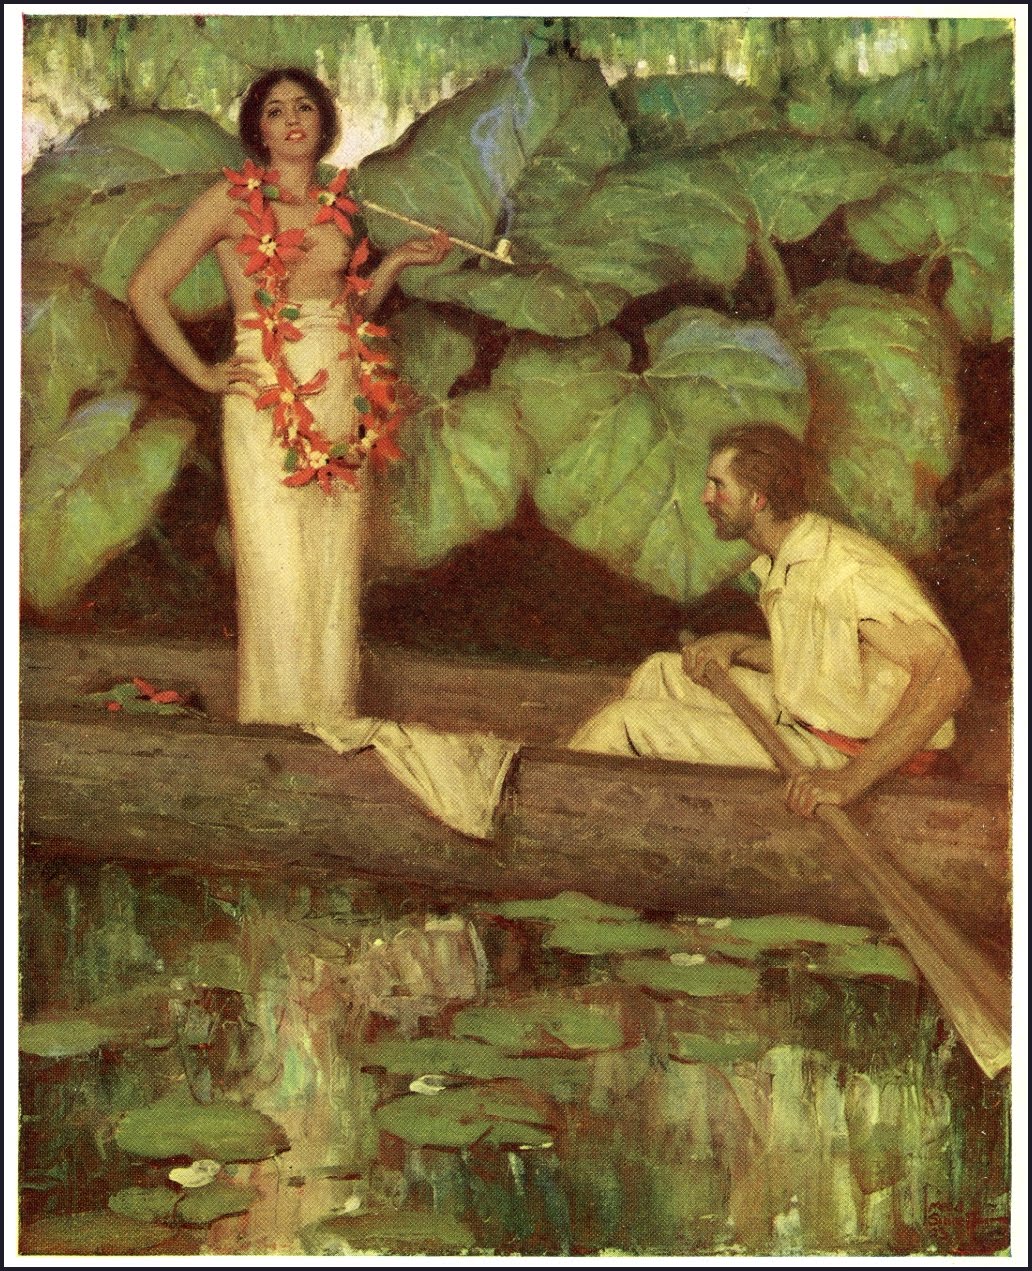 story illustration of a polynesian woman in a canoe with a man rowing